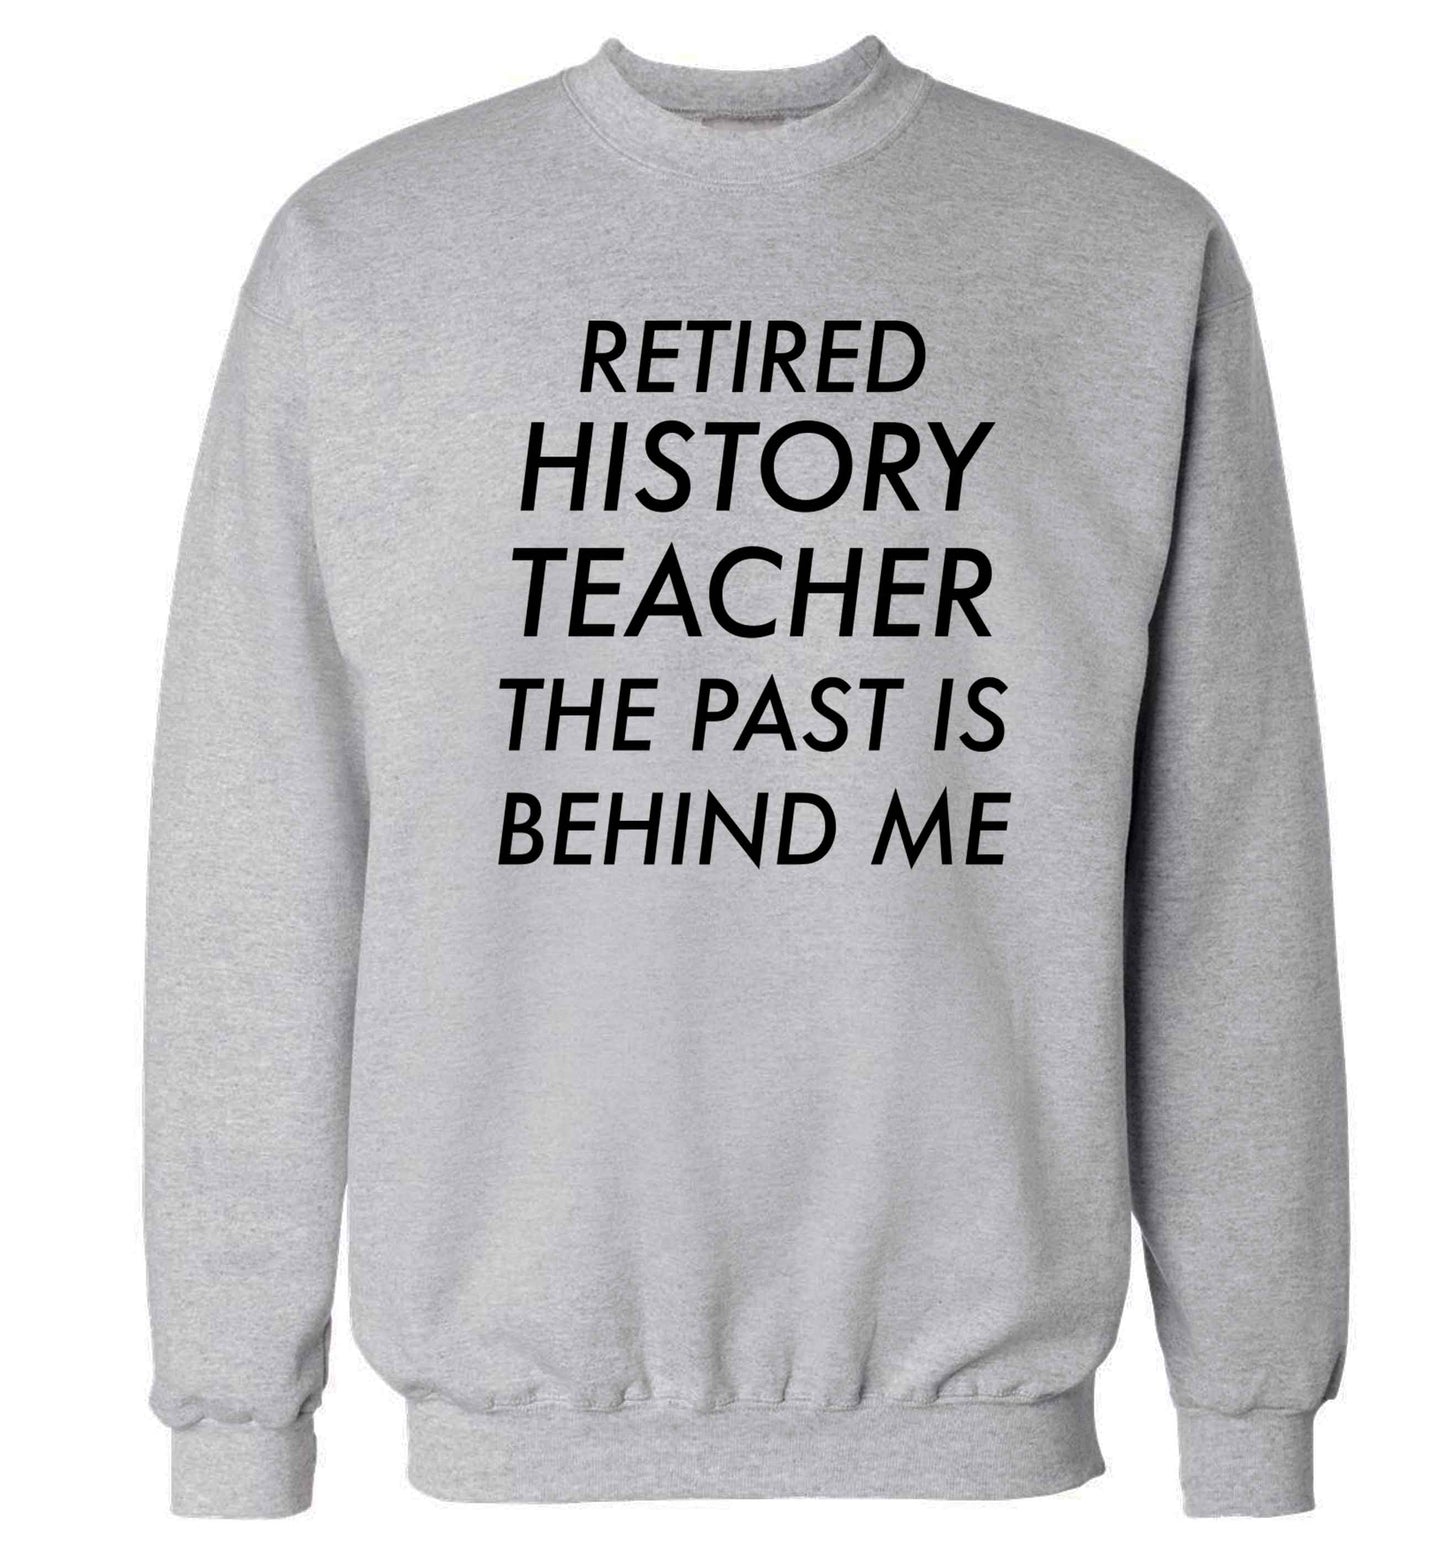 Retired history teacher the past is behind me Adult's unisex grey Sweater 2XL